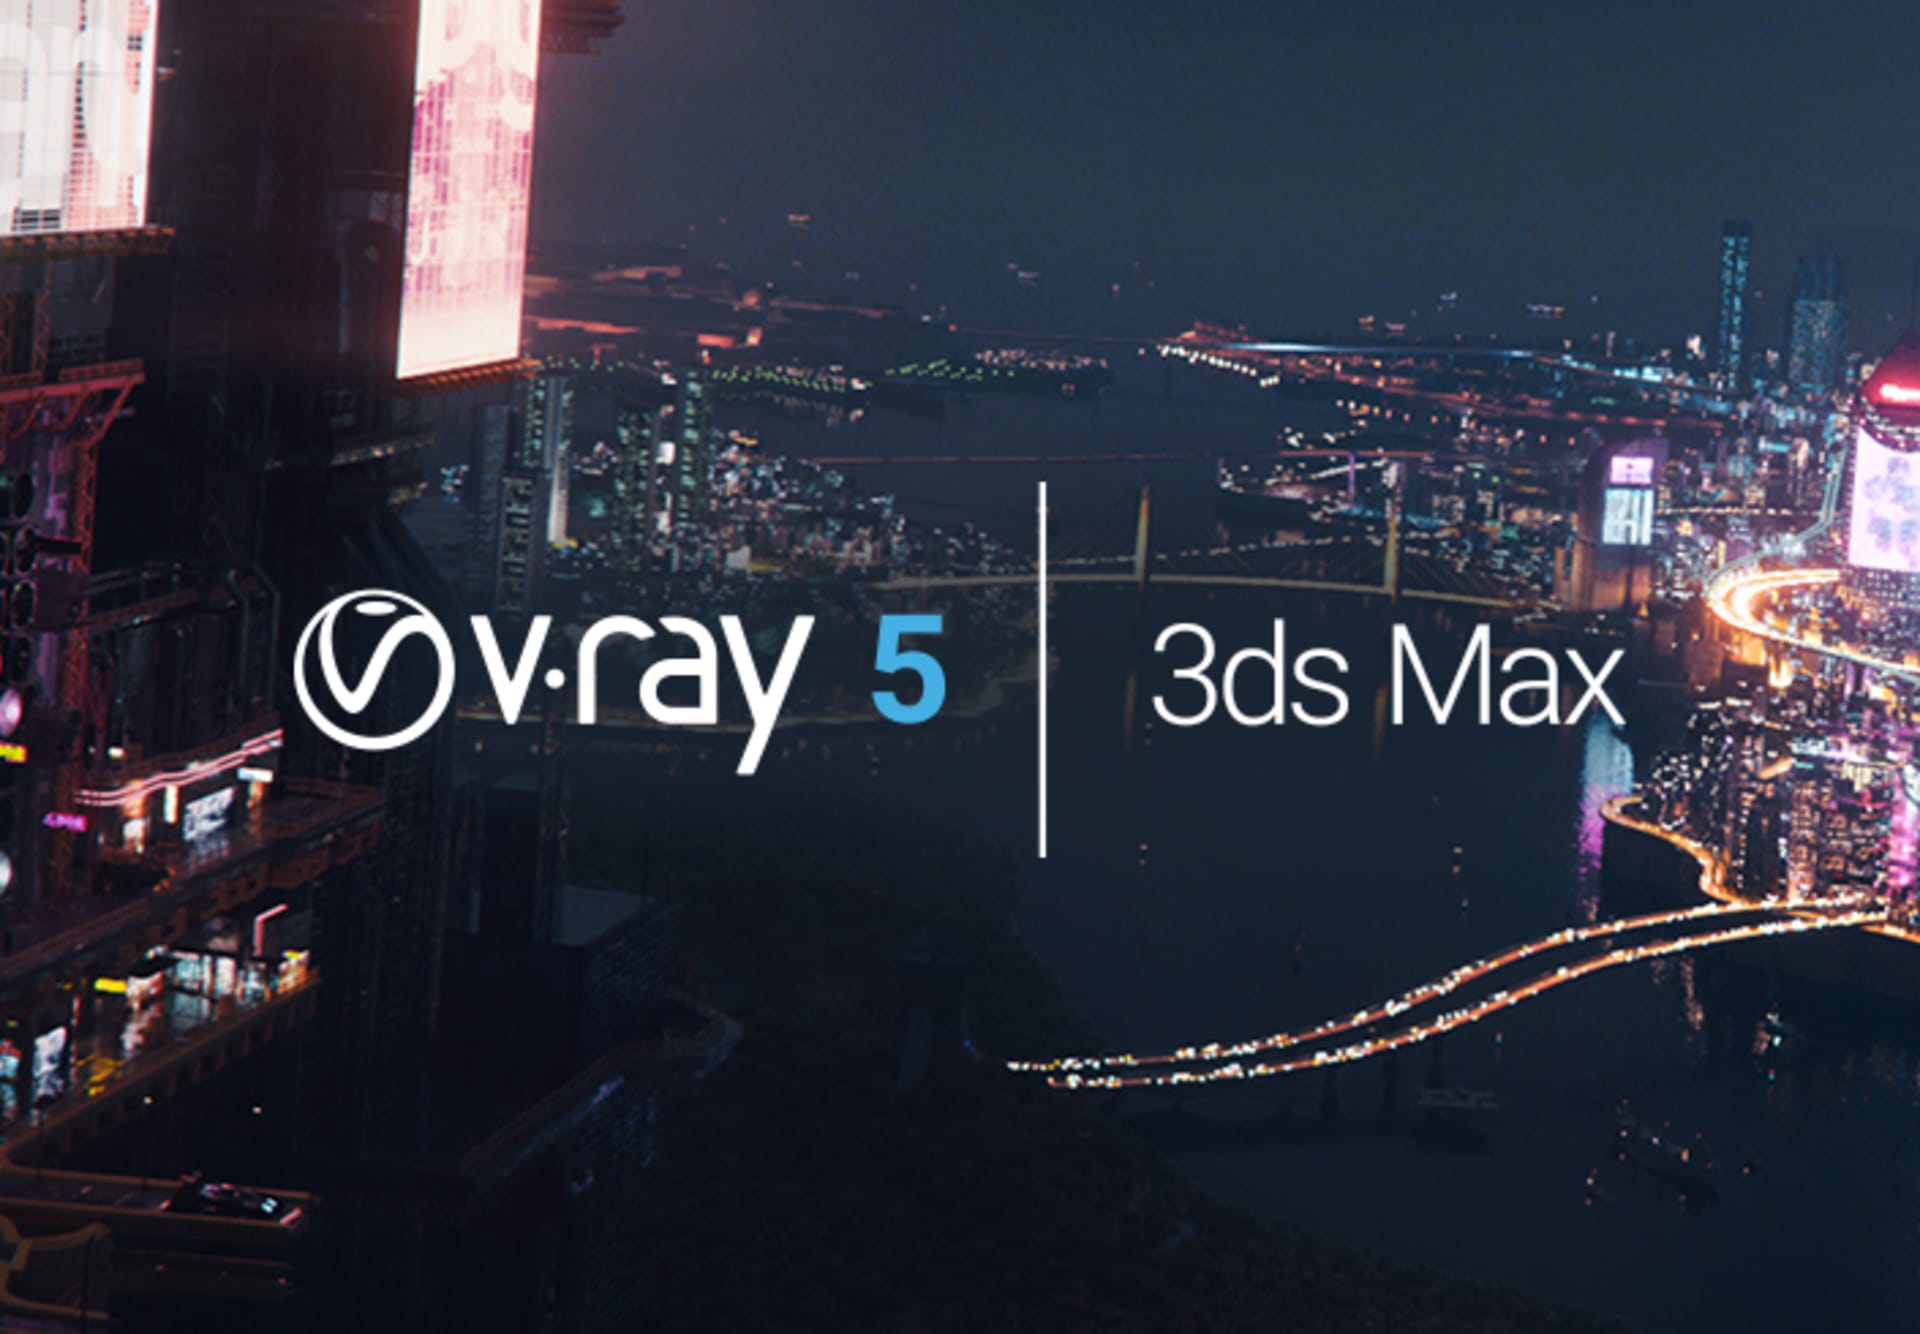 vray 5 for 3ds max 2020